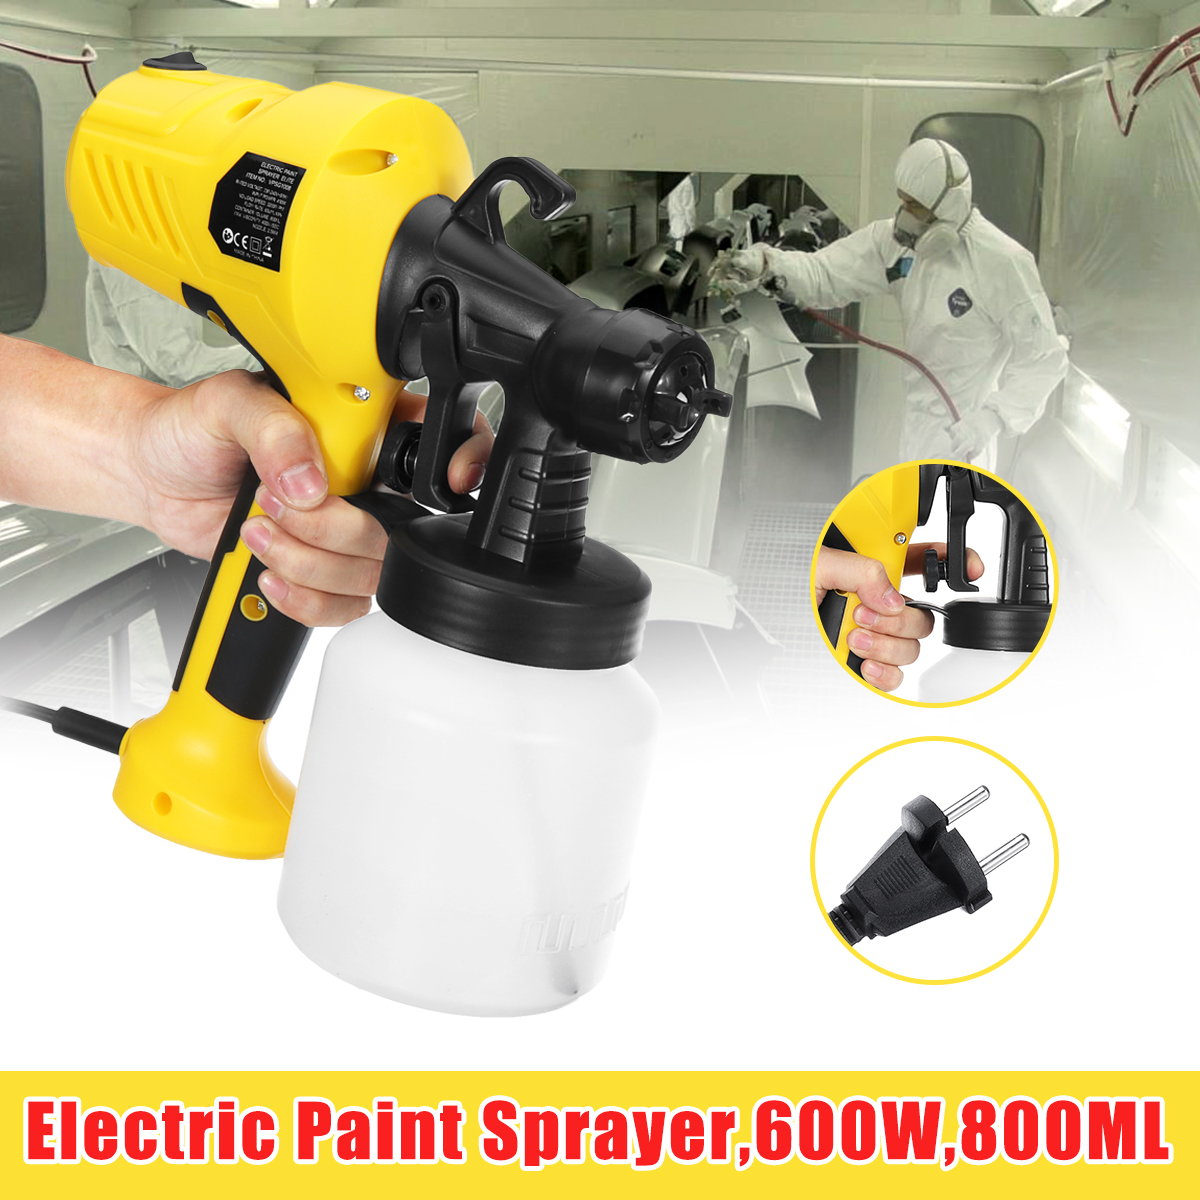 600W Electric Spray Paint Sprayer For Cars Wood Furniture Wall Woodworking 12